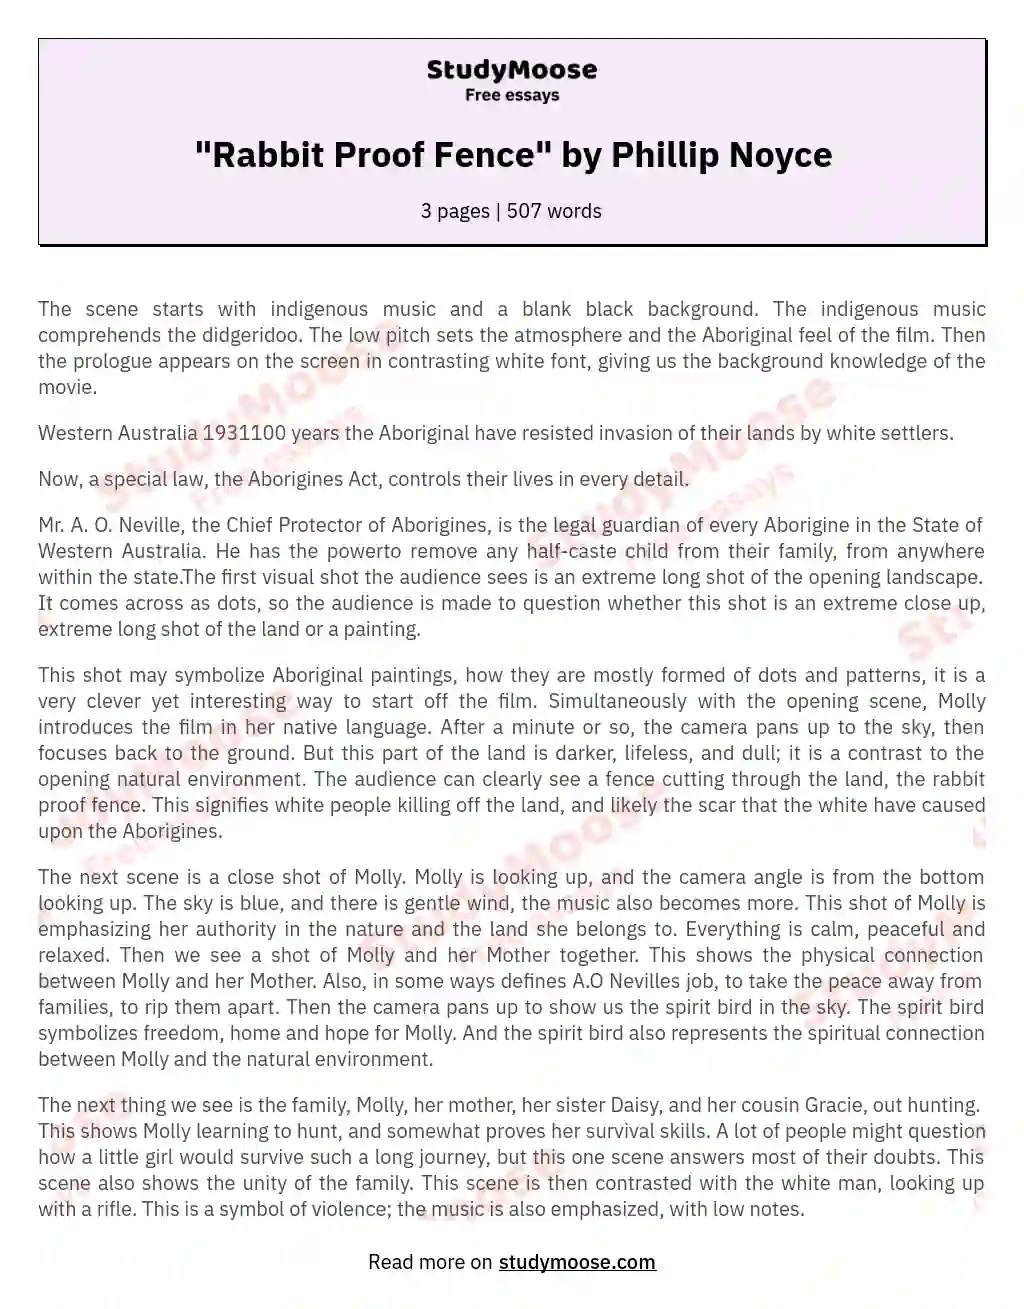 "Rabbit Proof Fence" by Phillip Noyce essay